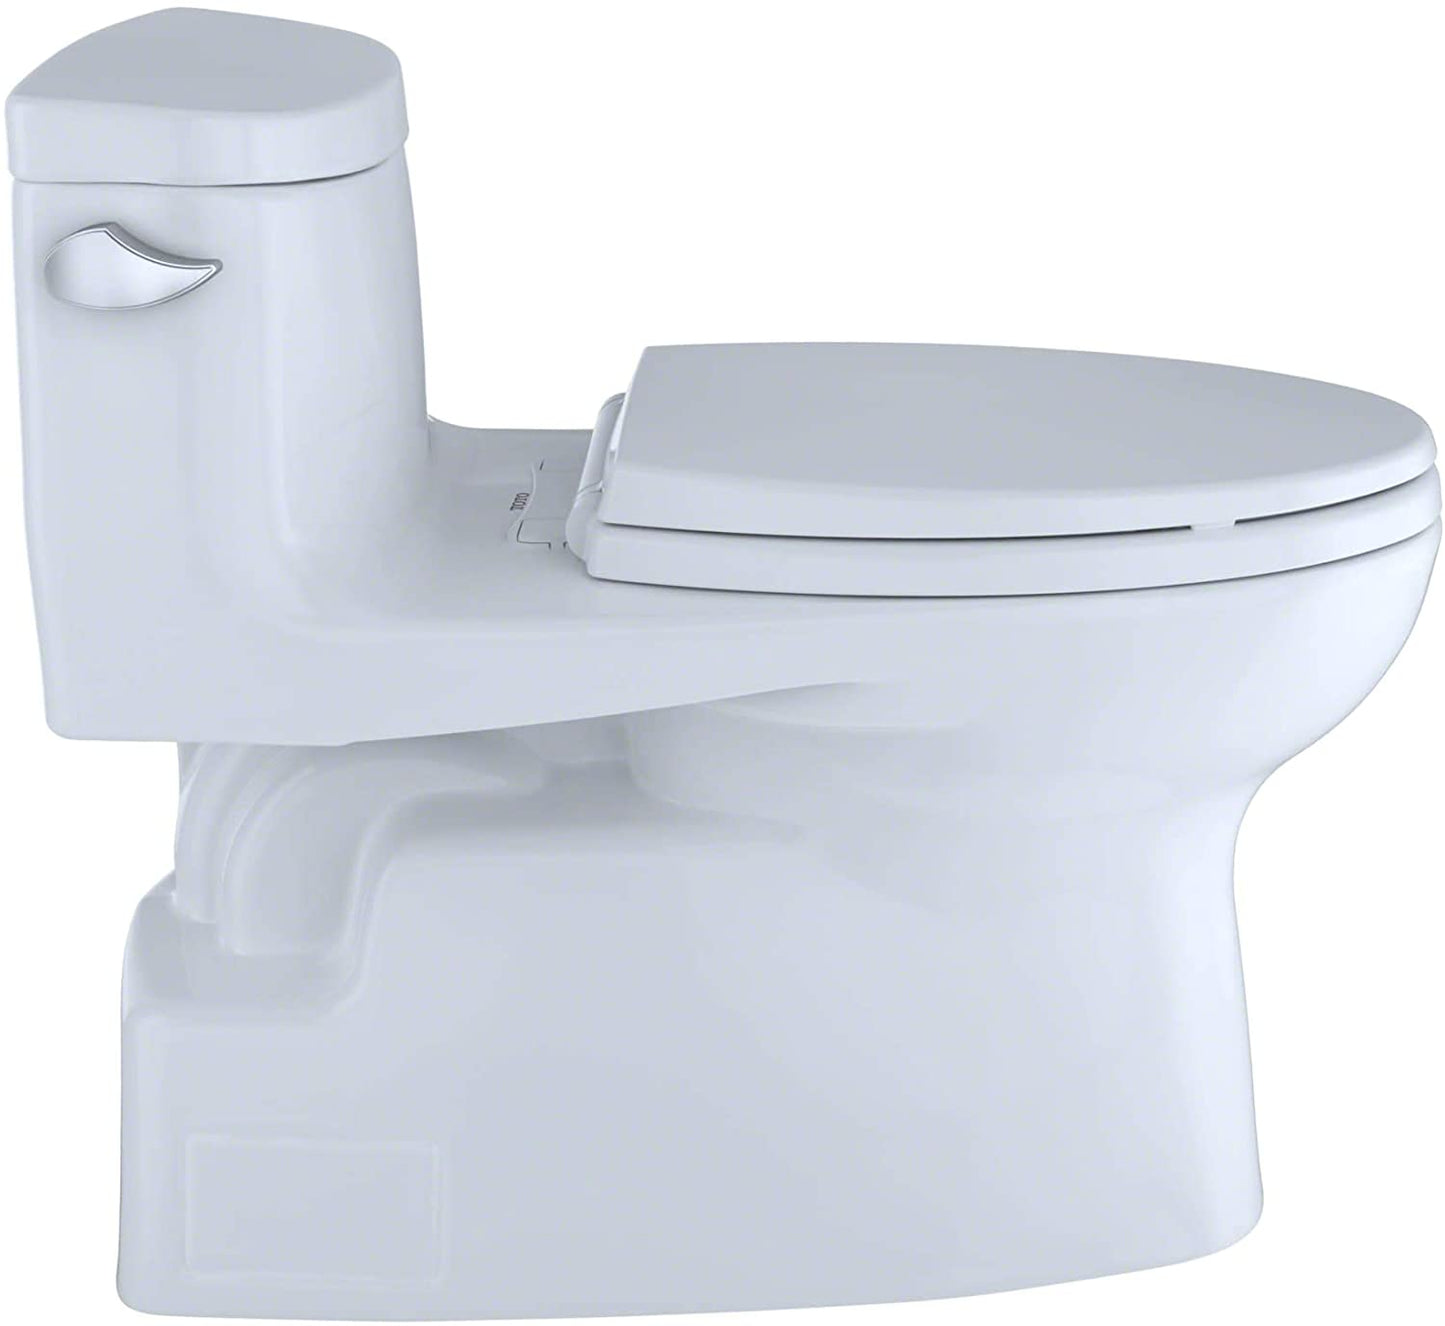 Carolina-2 One-Piece High-Efficiency Toilet with SanaGloss, 1.28GPF- Cotton